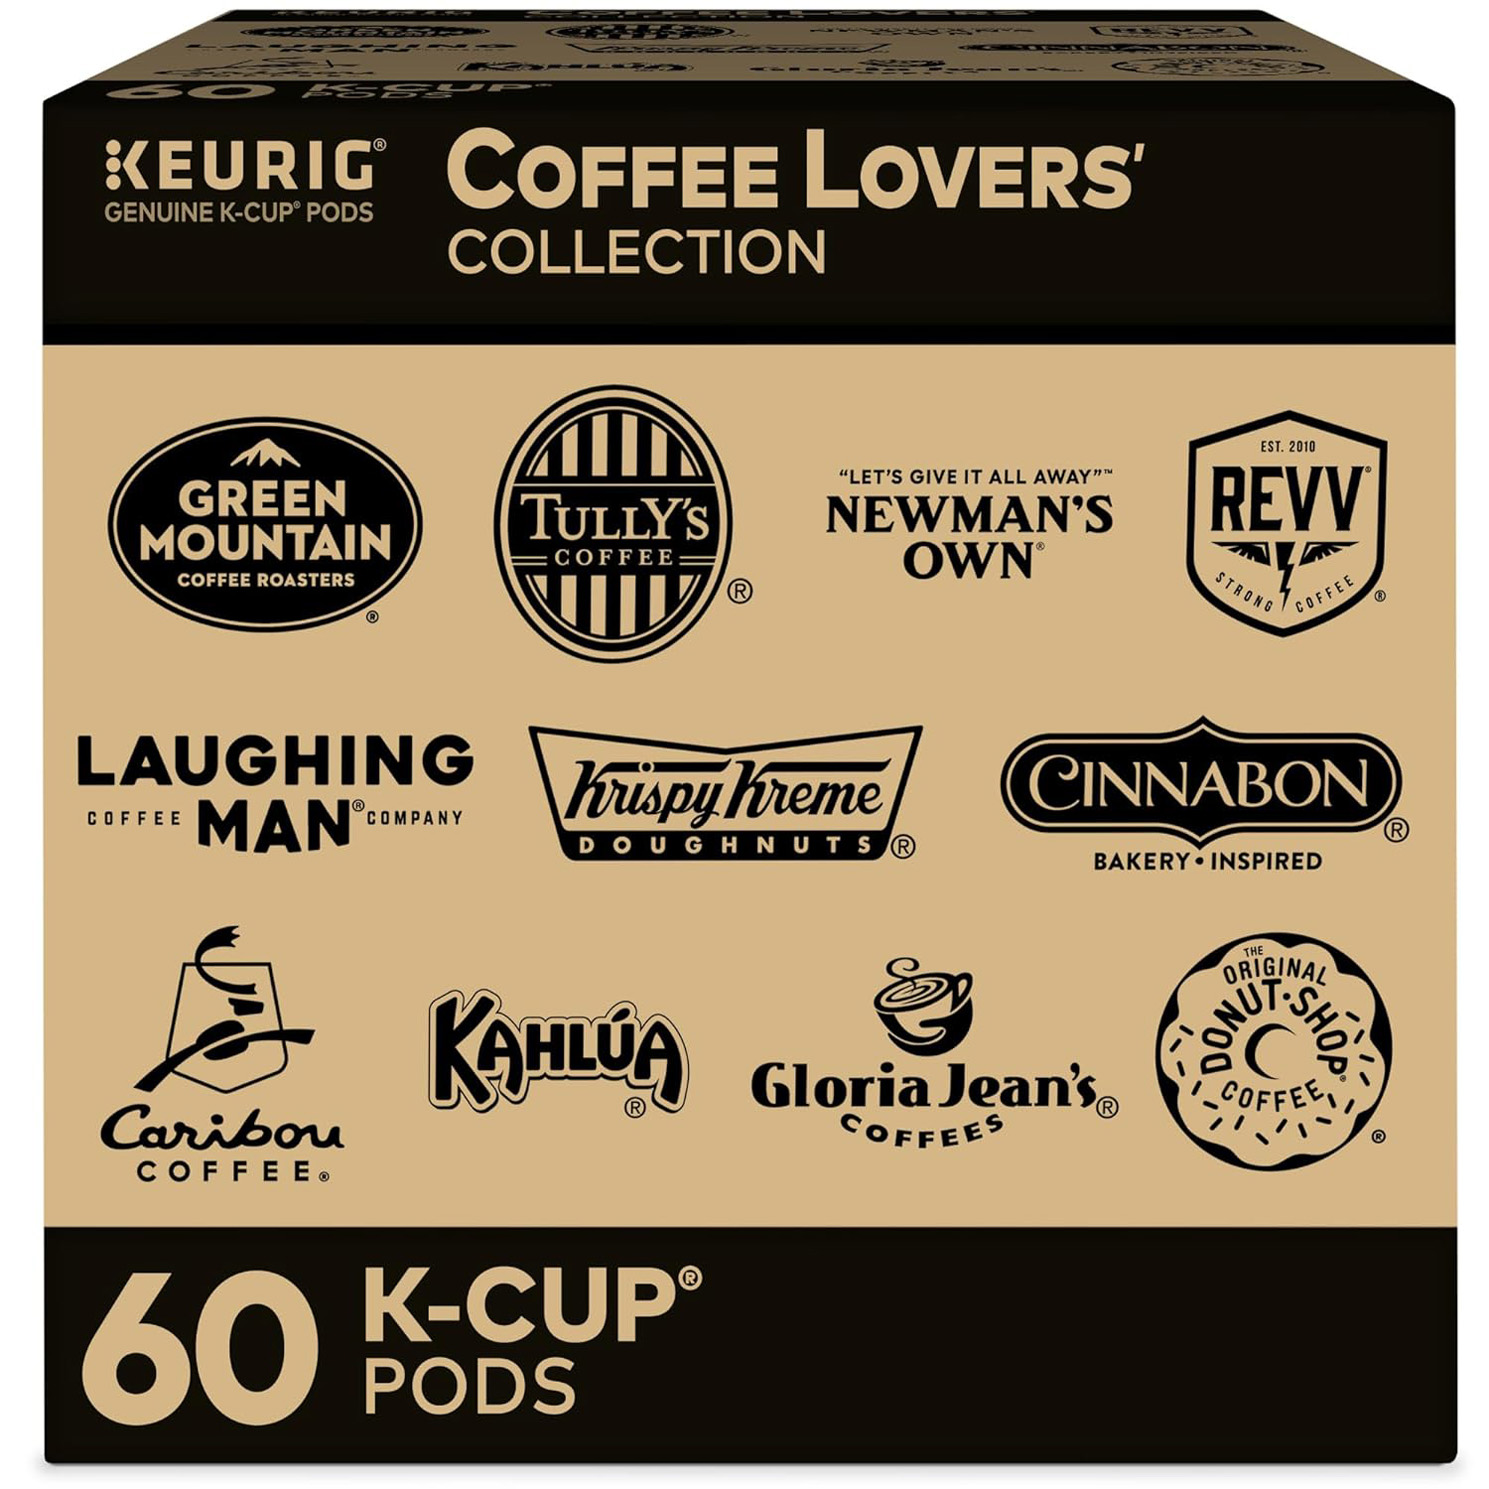 Keurig Coffee Lovers Collection, Single-Serve Coffee K-Cup Pods Sampler, 60ct